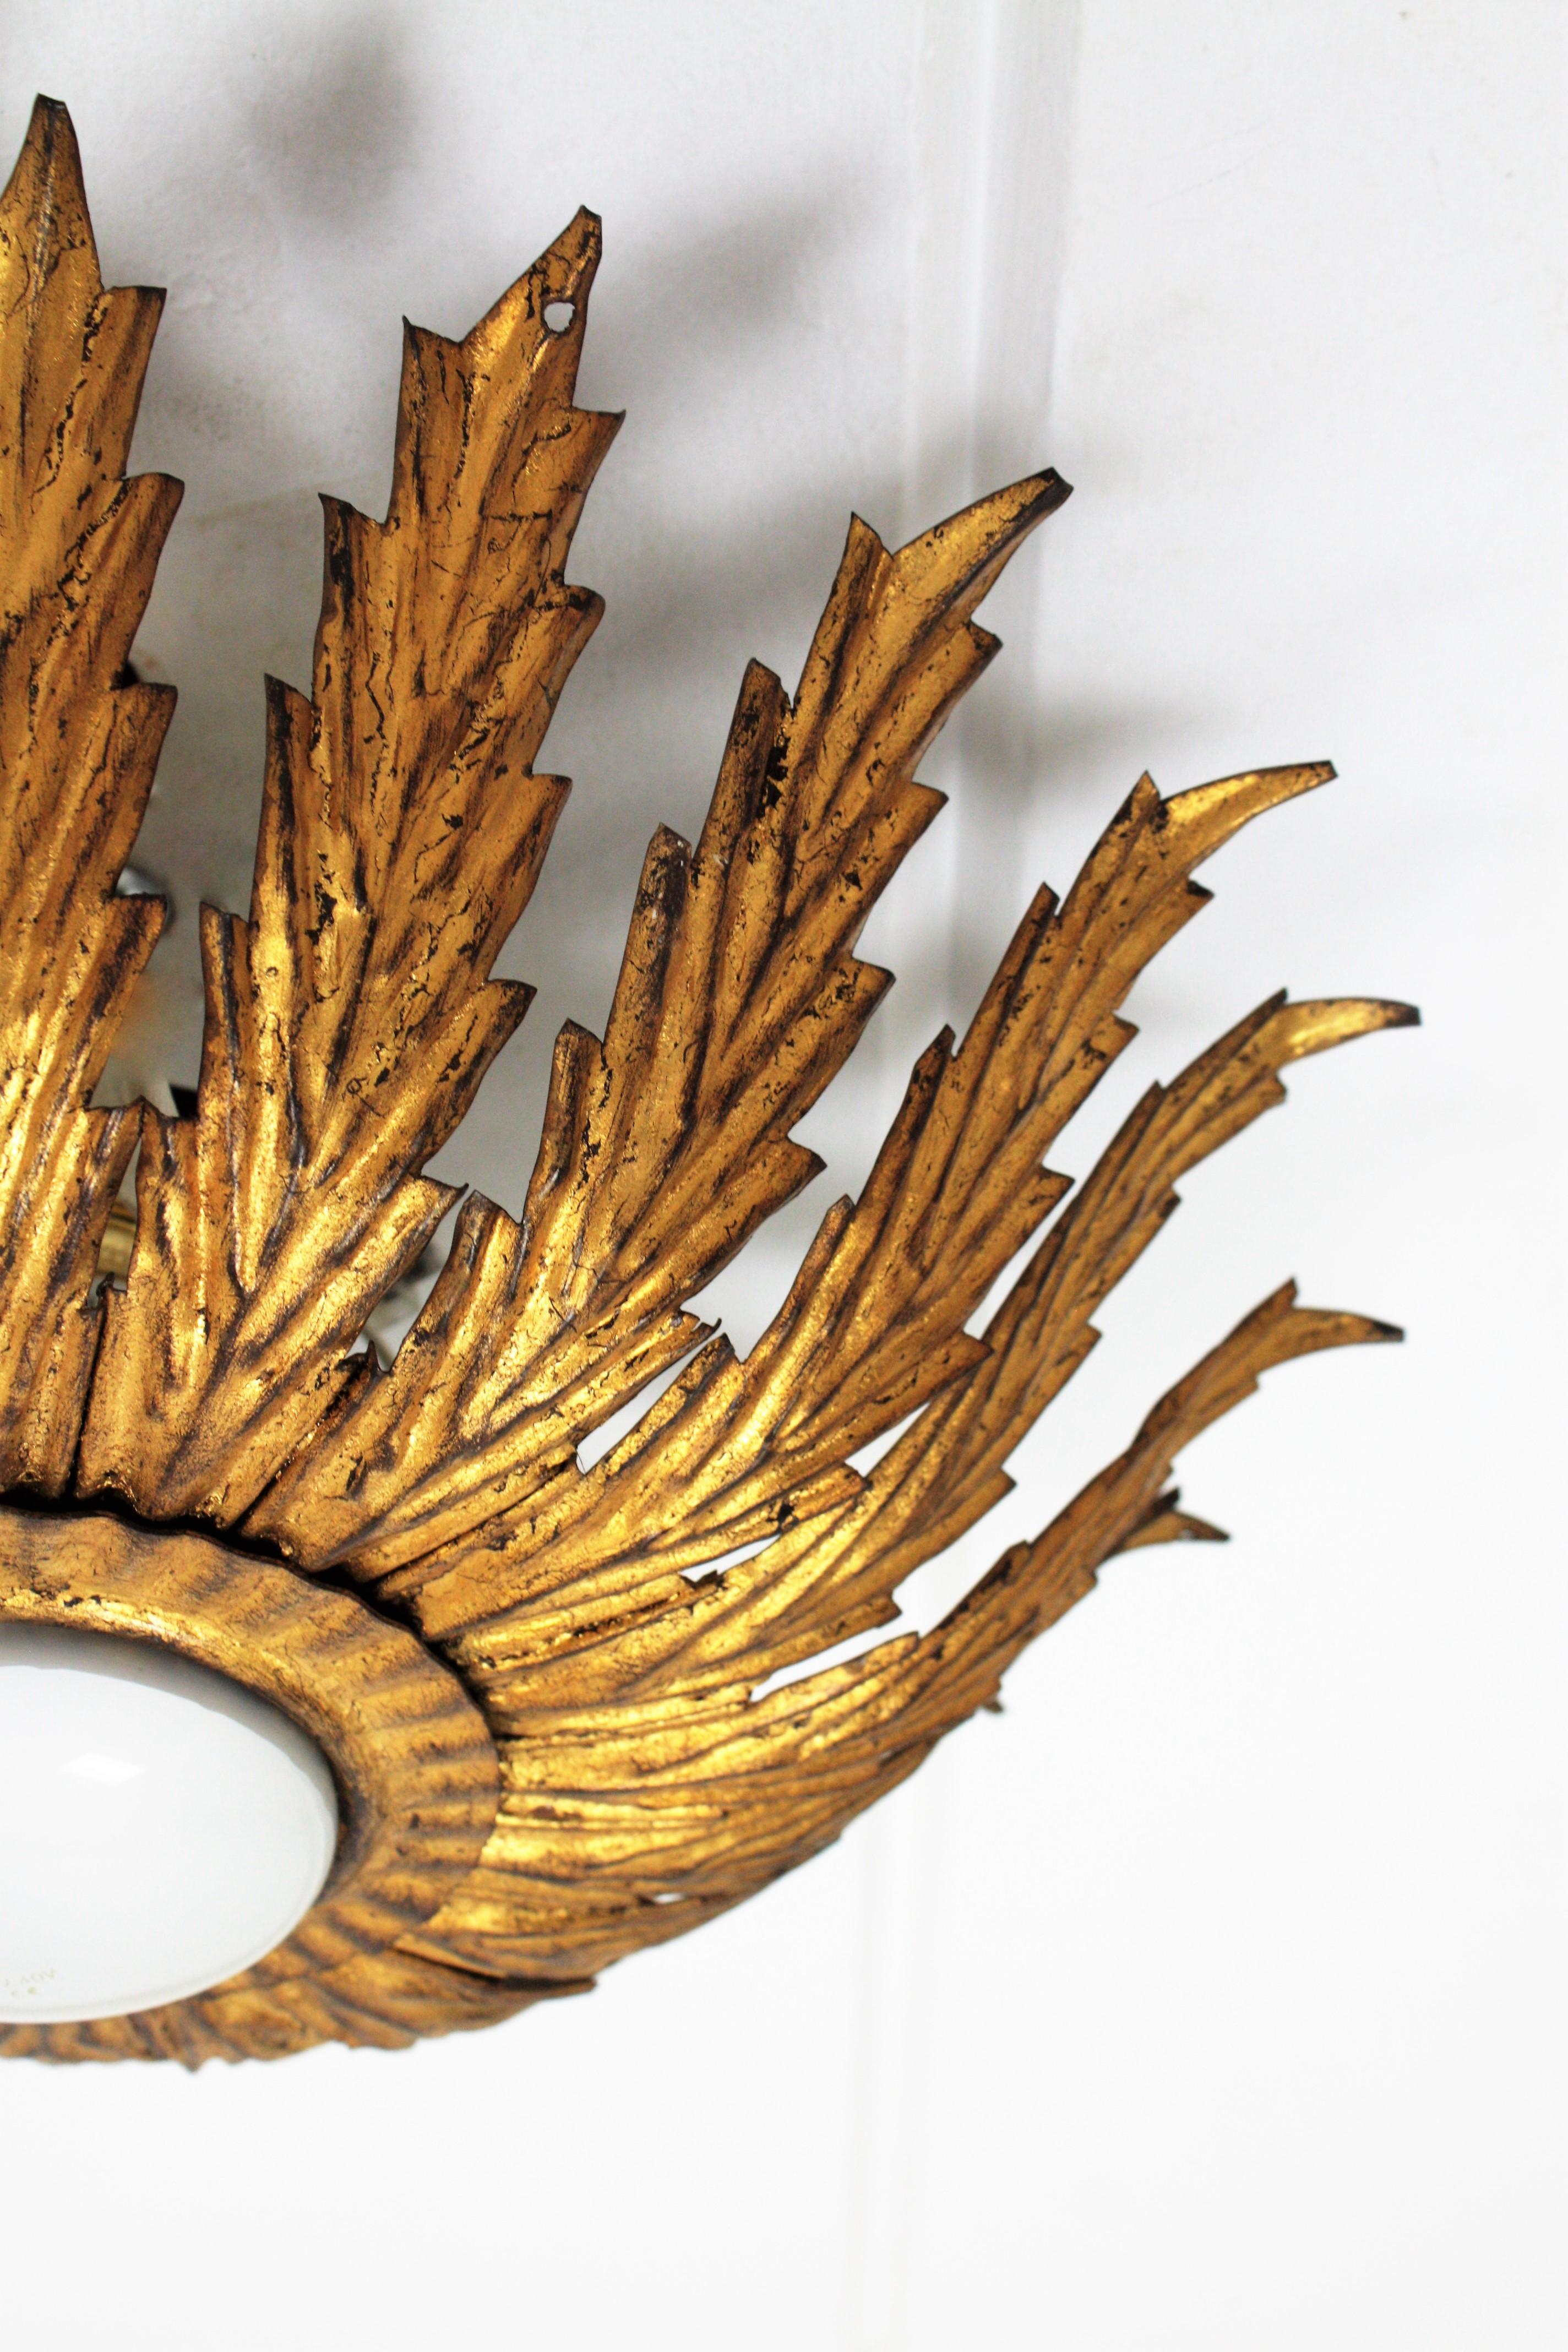 French Sunburst Light Fixture with Scalloped Leaves, Gilt Iron,  1950s For Sale 1